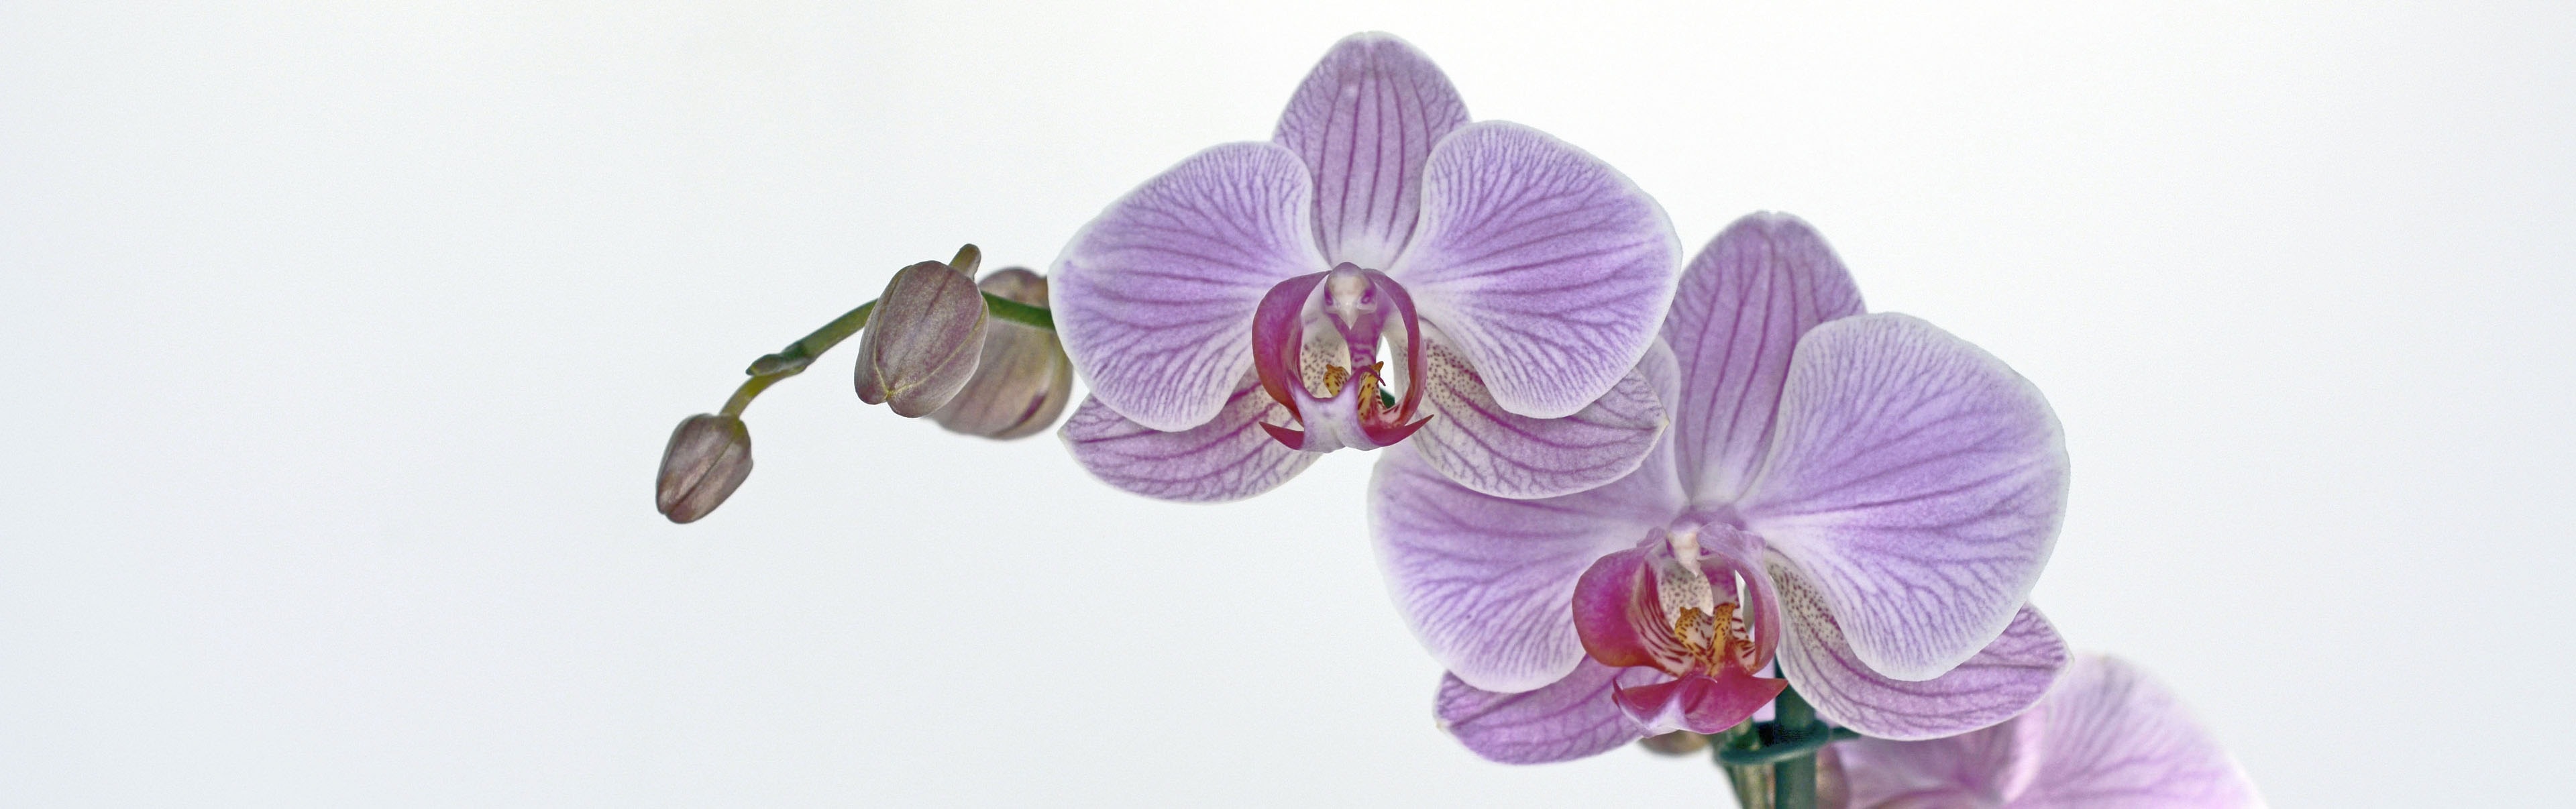 purple and white orchid